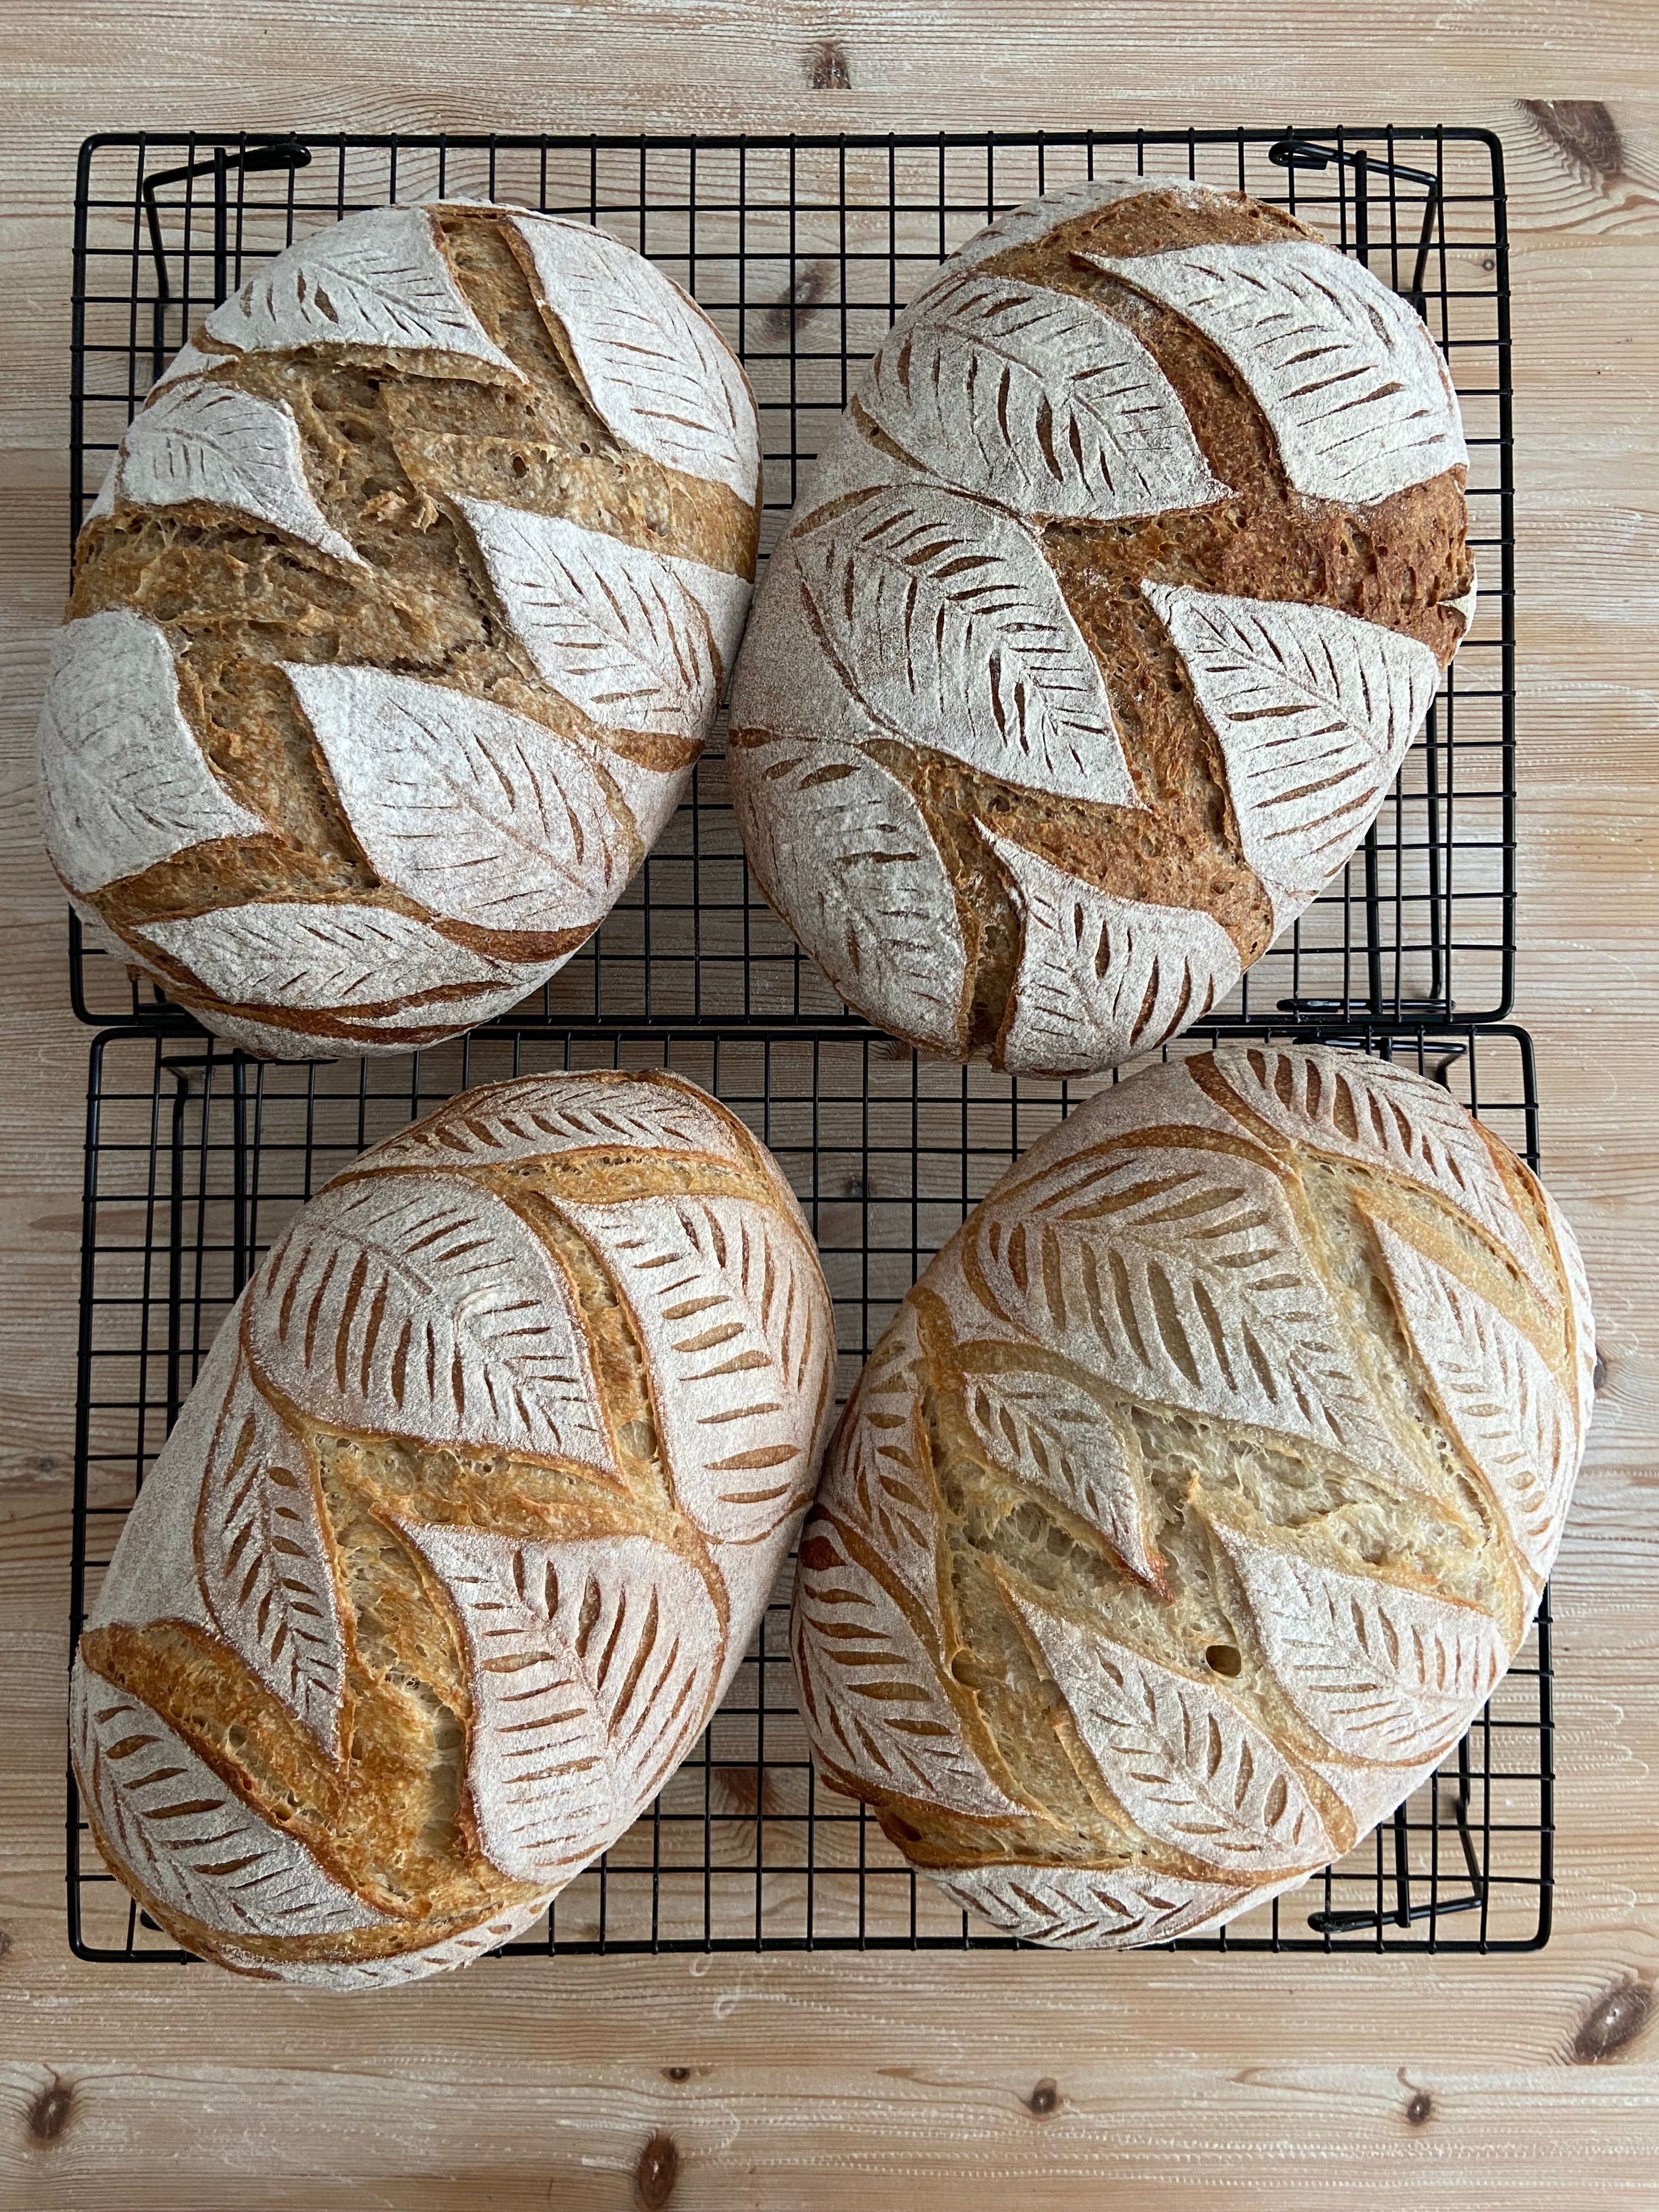 An image of loaves designed with leaves